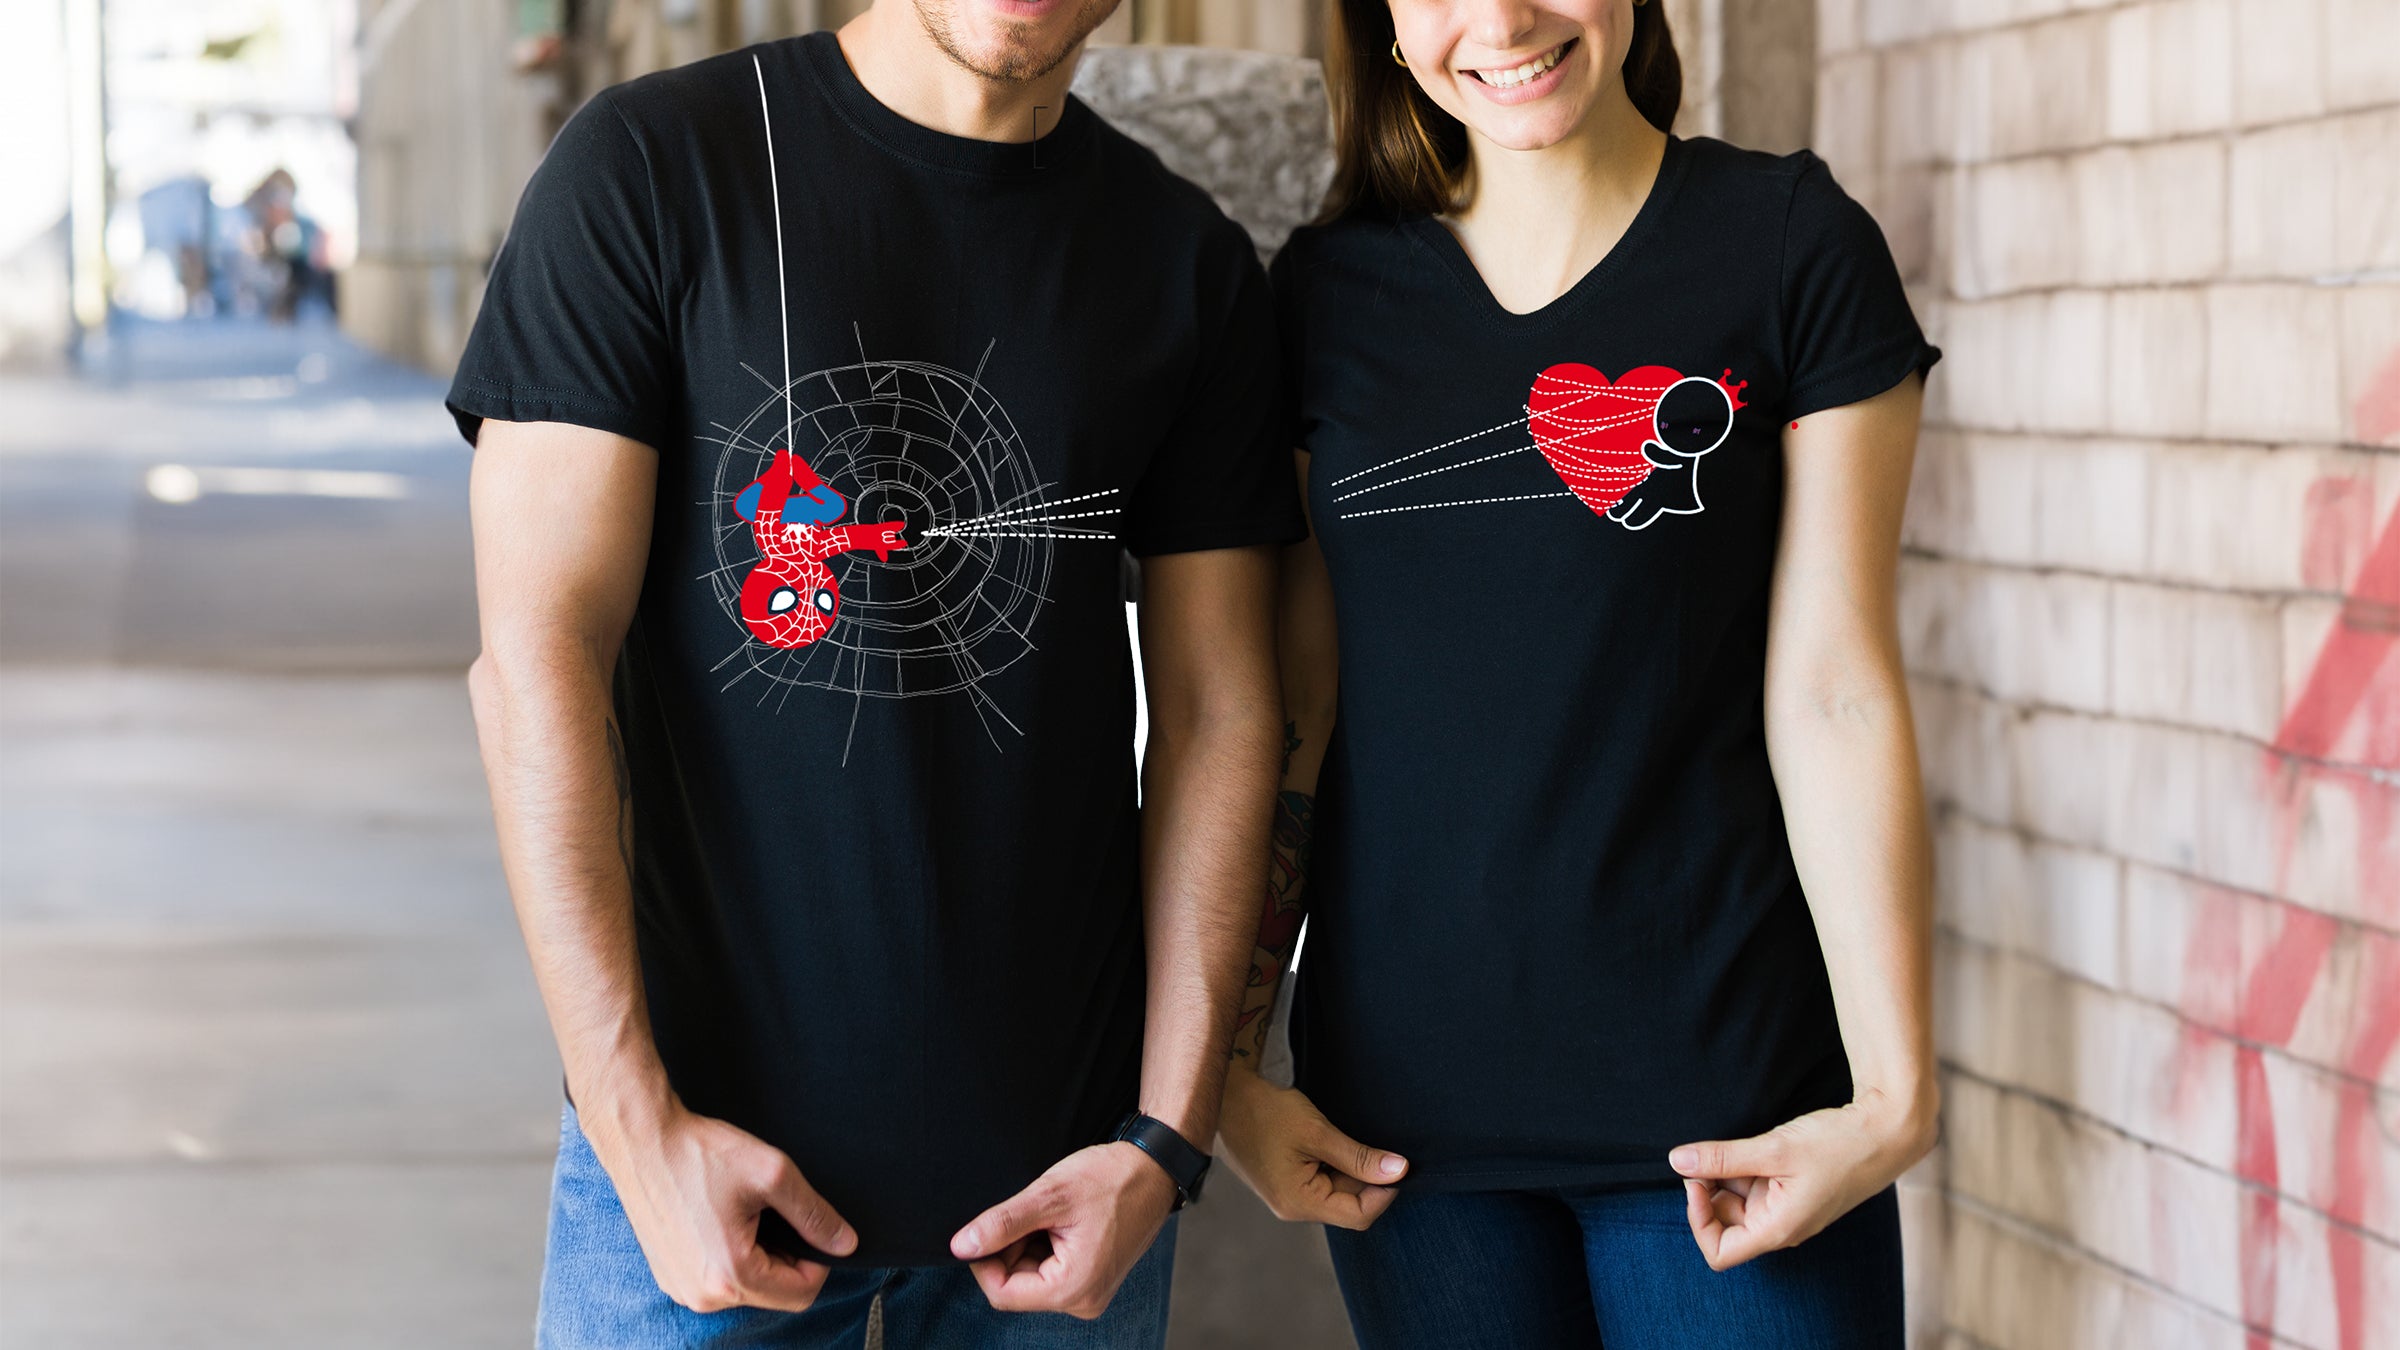 Love A Lot Matching Shirts for Couples - His and Hers Shirts – BOLDLOFT